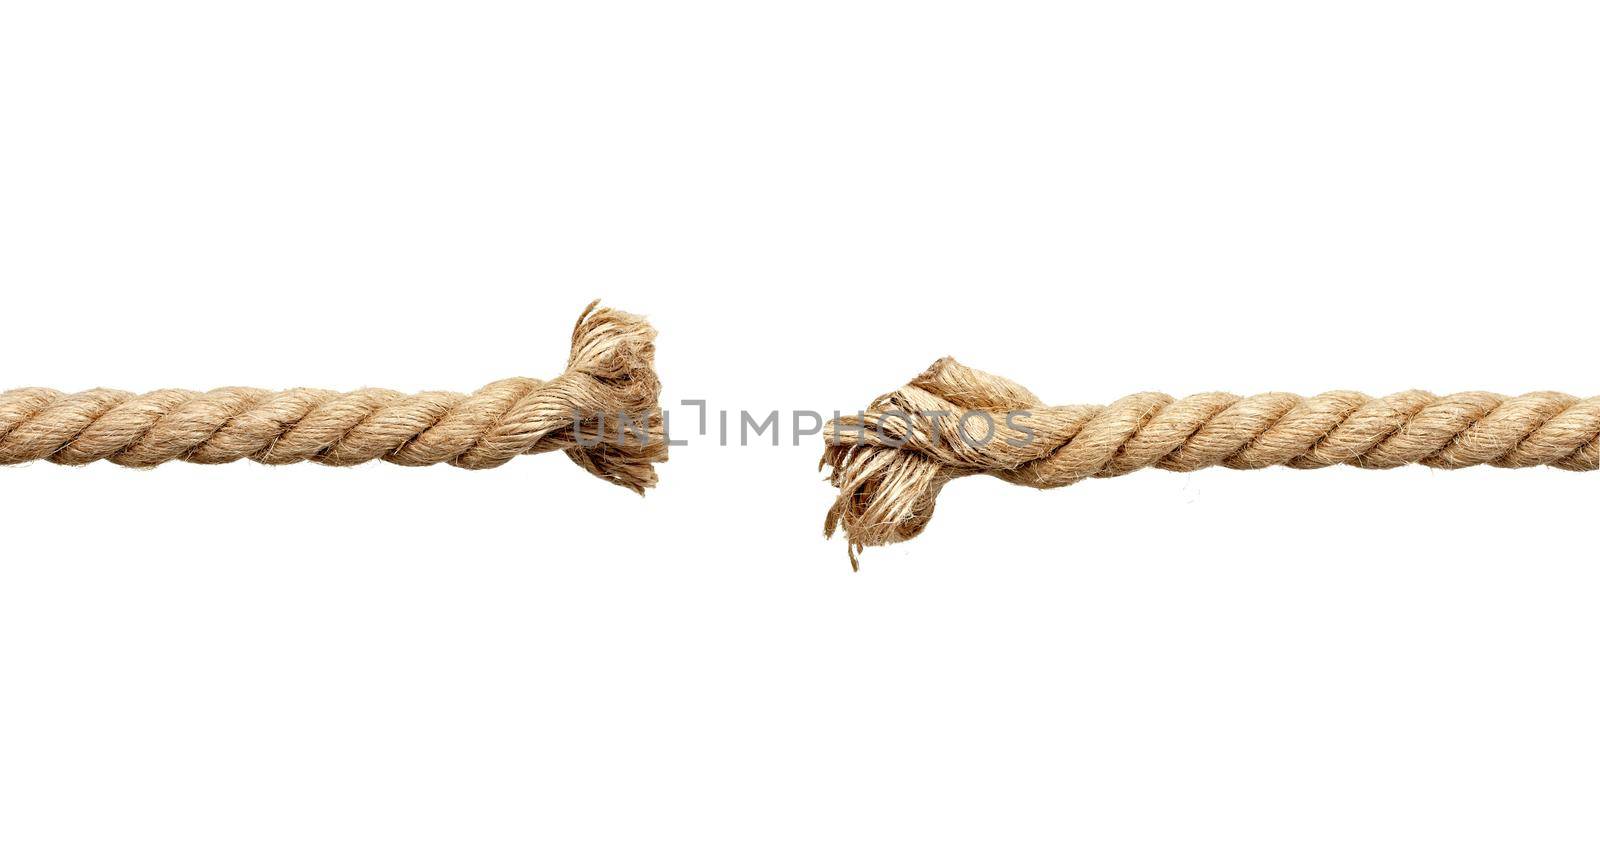 close up of a rope under pressure on white background